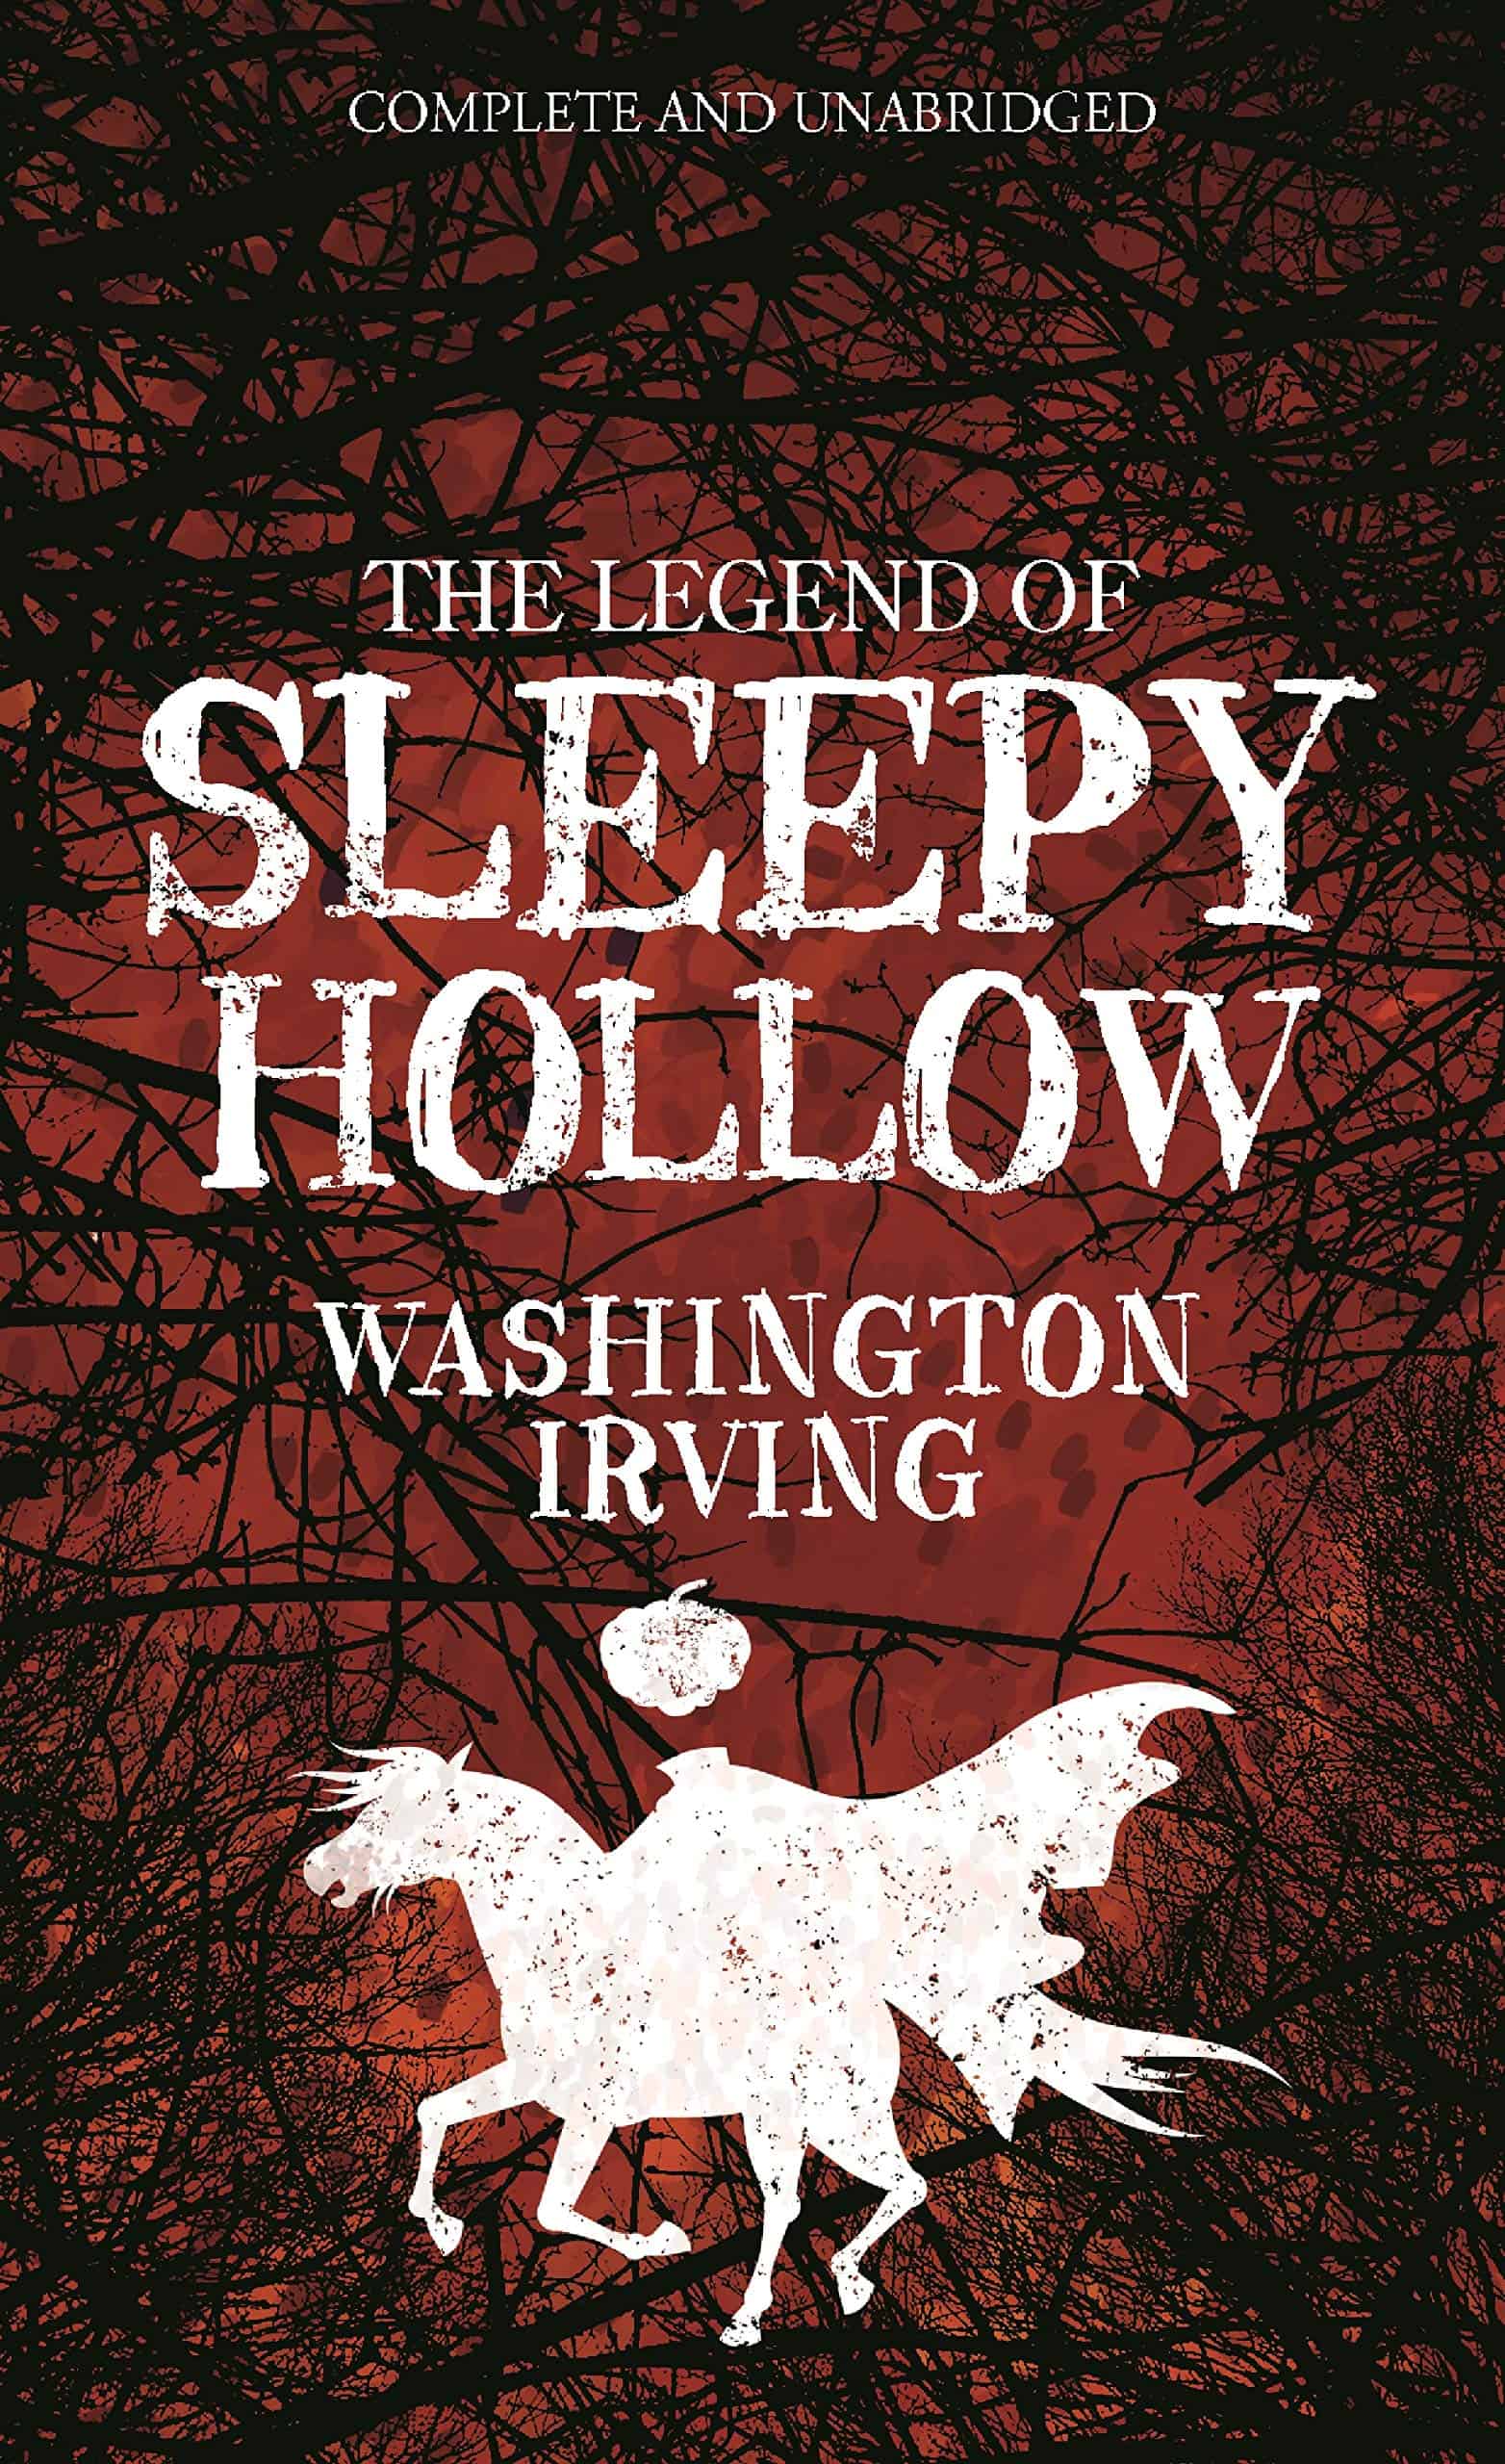 The Legend of Sleepy Hollow jacket cover